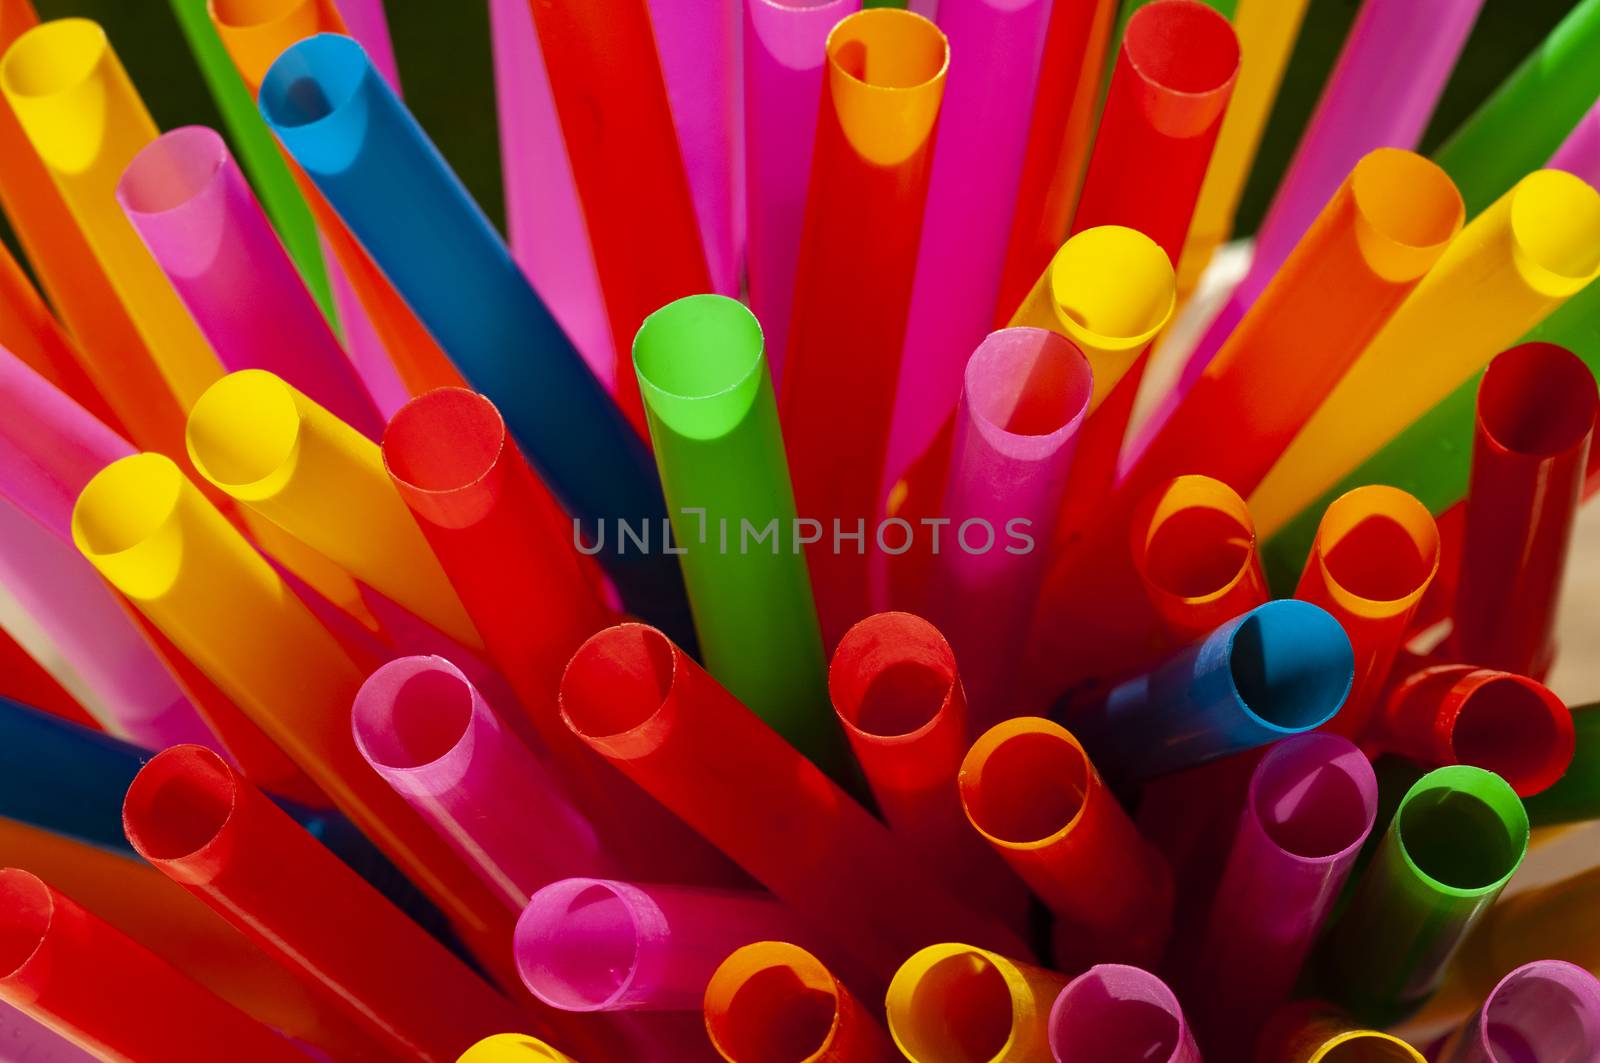 Colorful straws in sunlight by Haspion